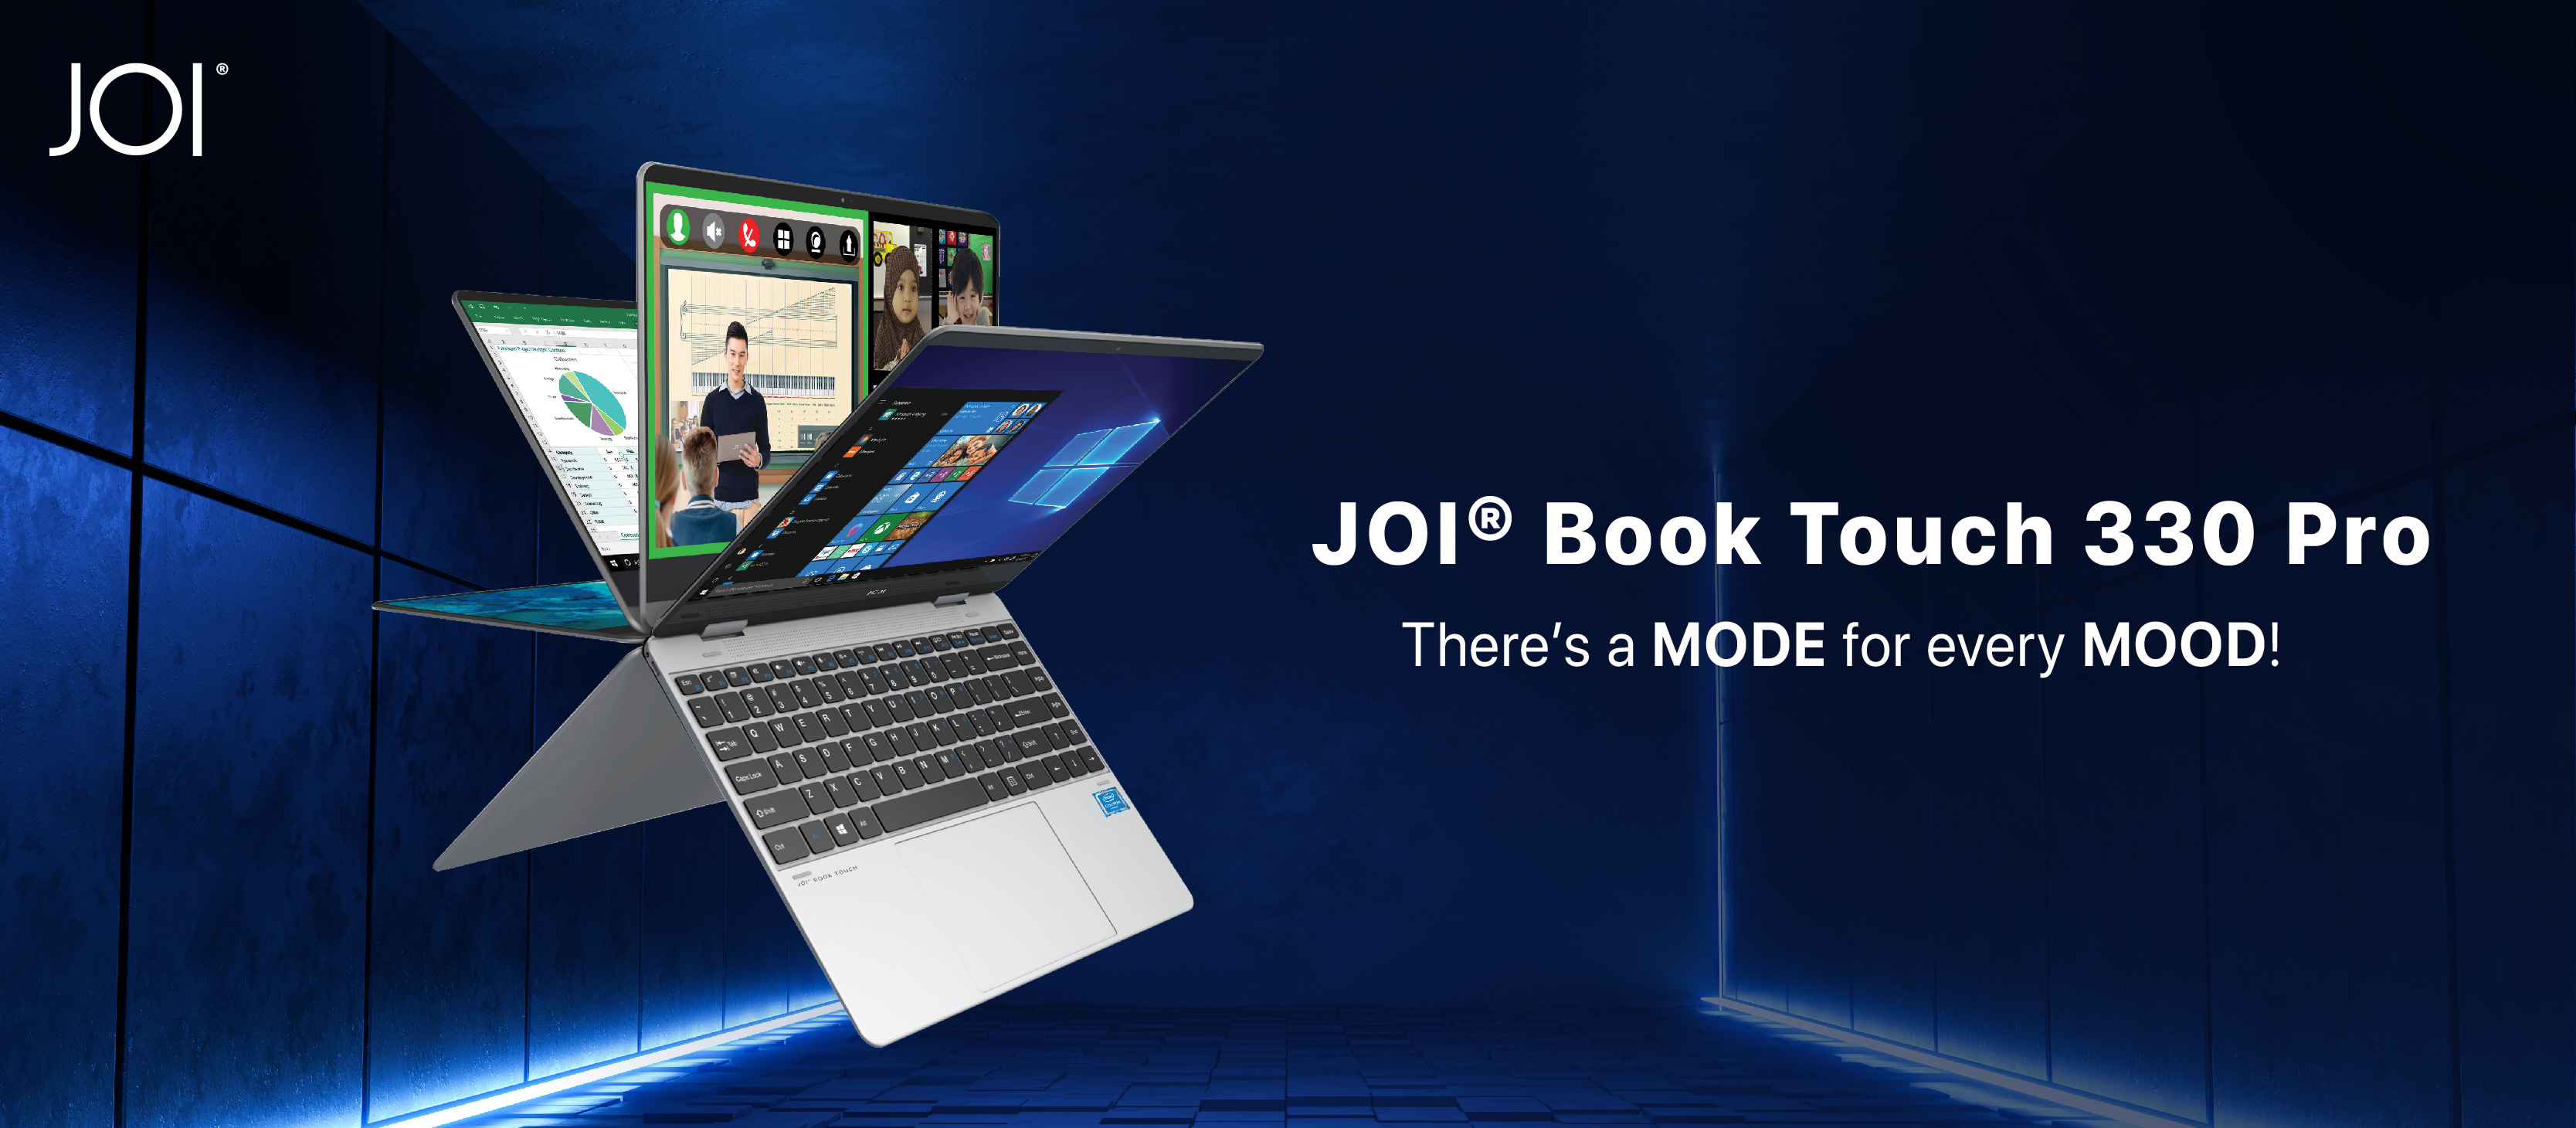 joibooktouch330pro